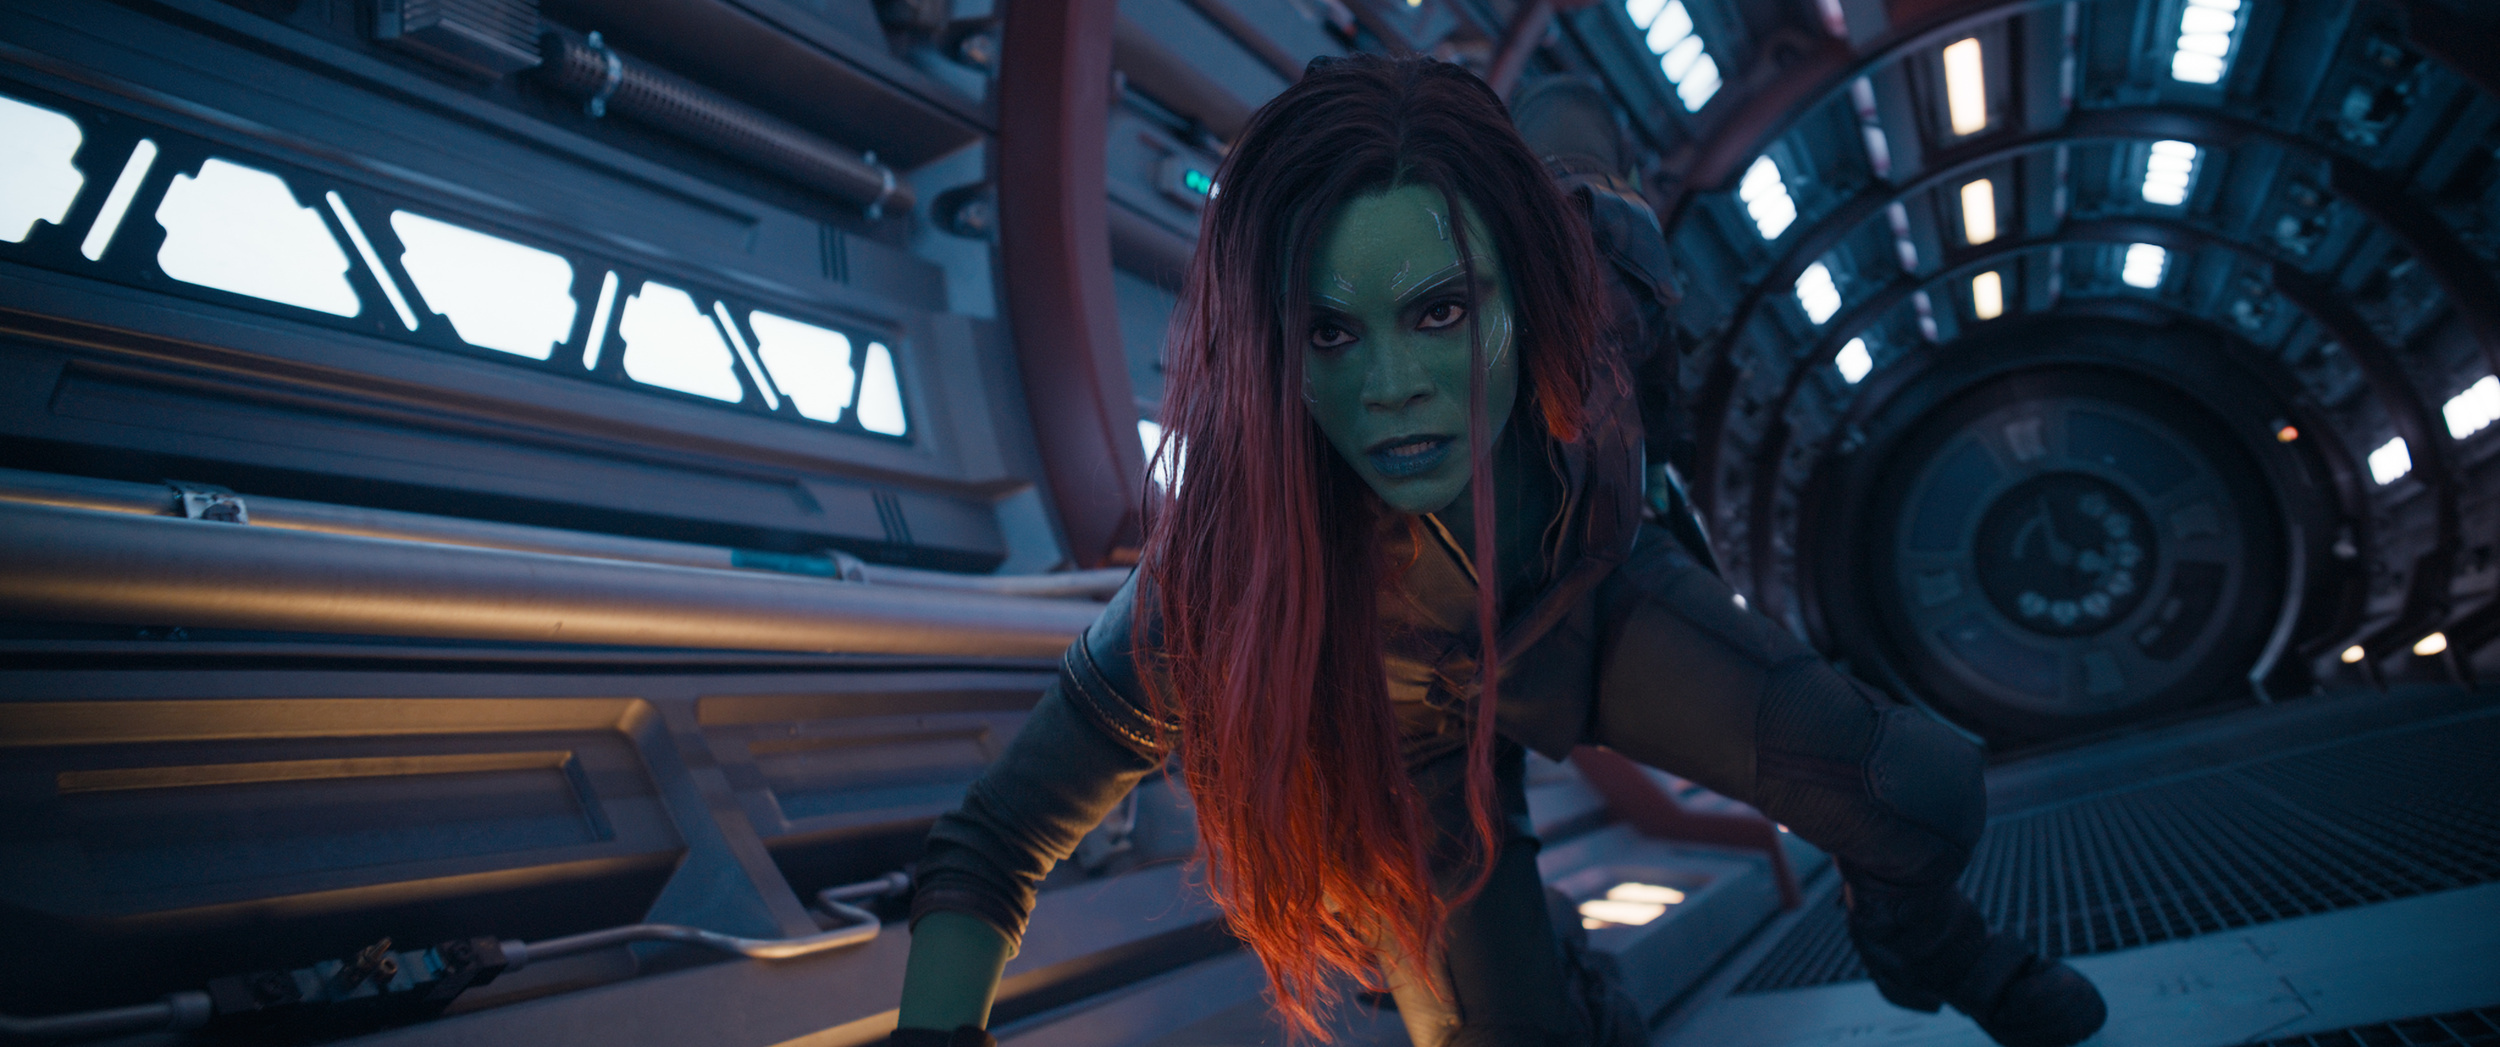 <p>At the end of “Vol. 3,” the film notes that Star-Lord will return, but notably, only Star-Lord is mentioned. Pratt has said that he would return to play Quill if he likes a script. Dave Bautista, who plays Drax, seems apathetic about returning. Meanwhile, Zoe Saldana has said that she is indeed done playing Gamora, but is cool if another actor steps into the role. All in all this is almost definitely the end of the Guardians of the Galaxy.</p><p>You may also like: <a href='https://www.yardbarker.com/entertainment/articles/the_essential_y2k_playlist/s1__40344876'>The essential Y2K playlist</a></p>